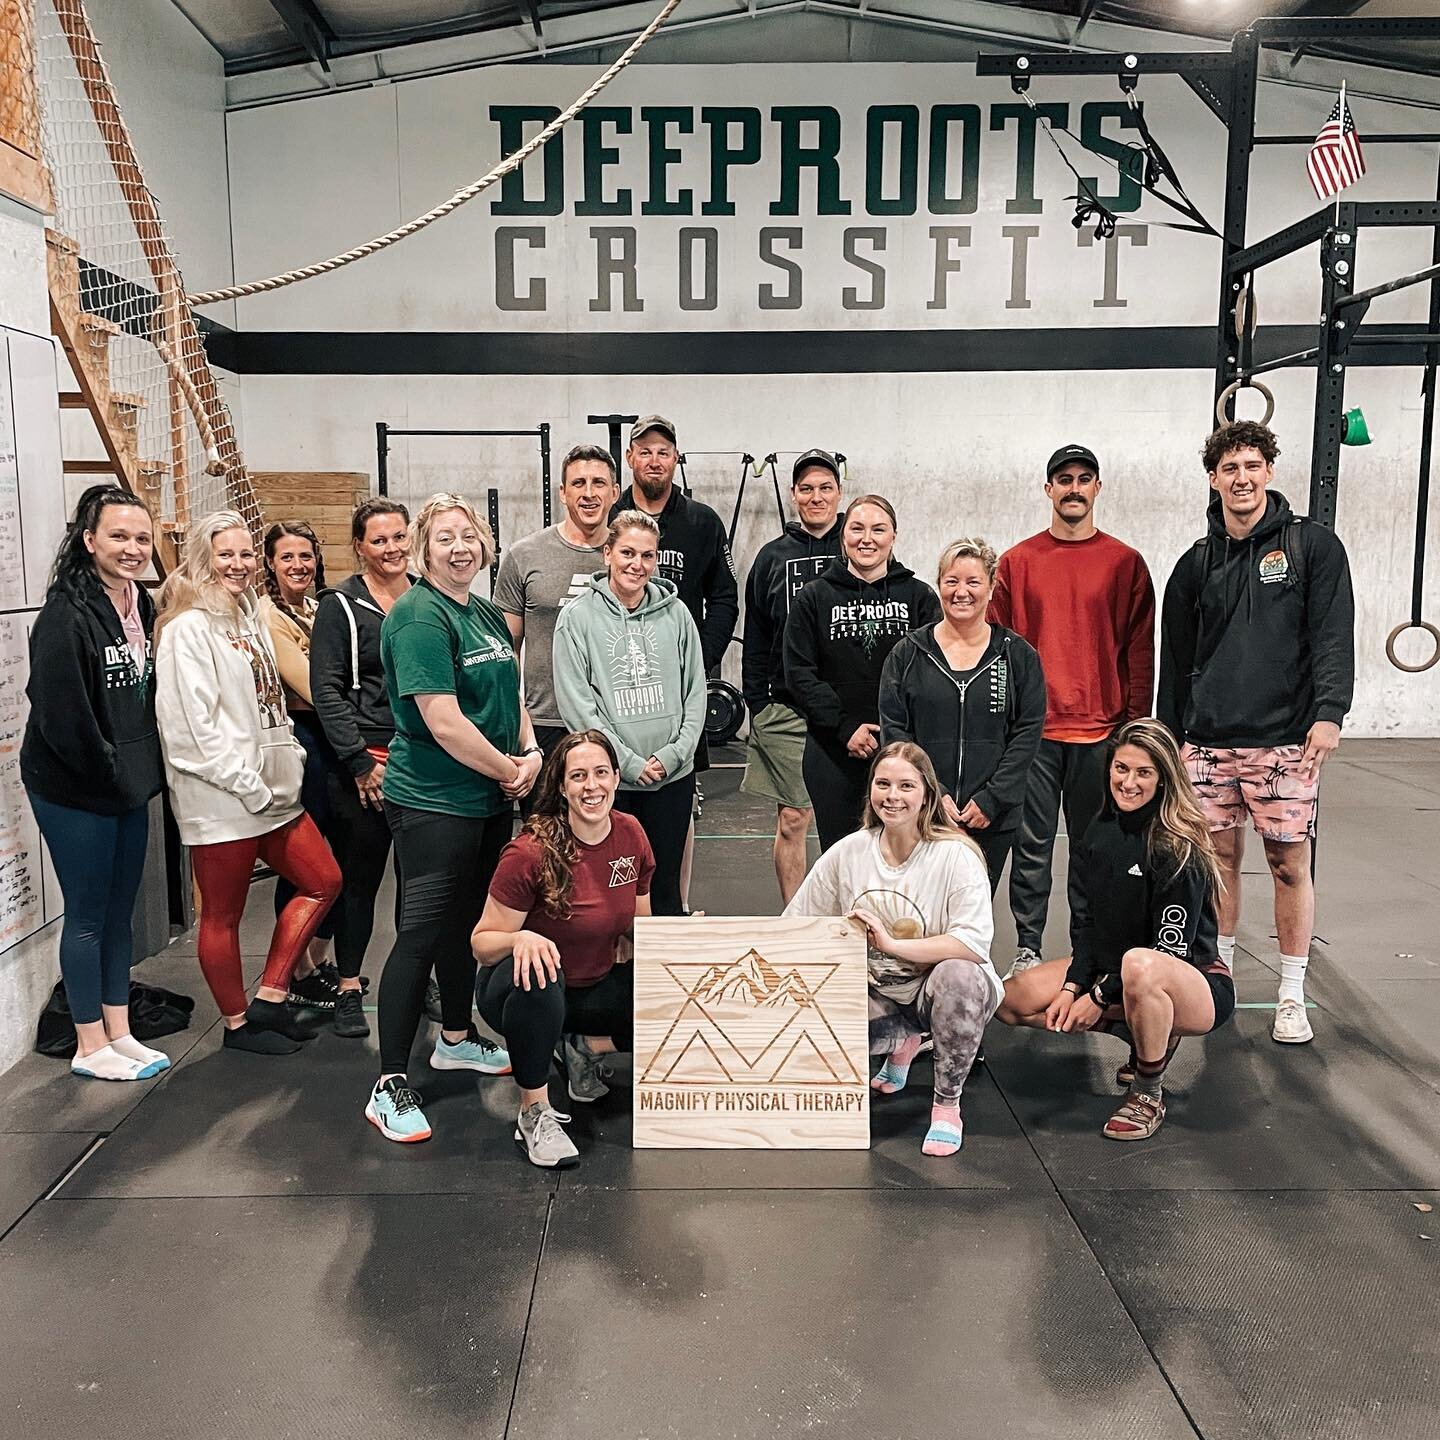 &ldquo;Watch your actions, they become your habits. Watch your habits, they become your character.&rdquo; -Vince Lombardi

👆🏻This quote was the theme for our squat workshop yesterday! We took time to go back to basics in our squat set up, diagnose 